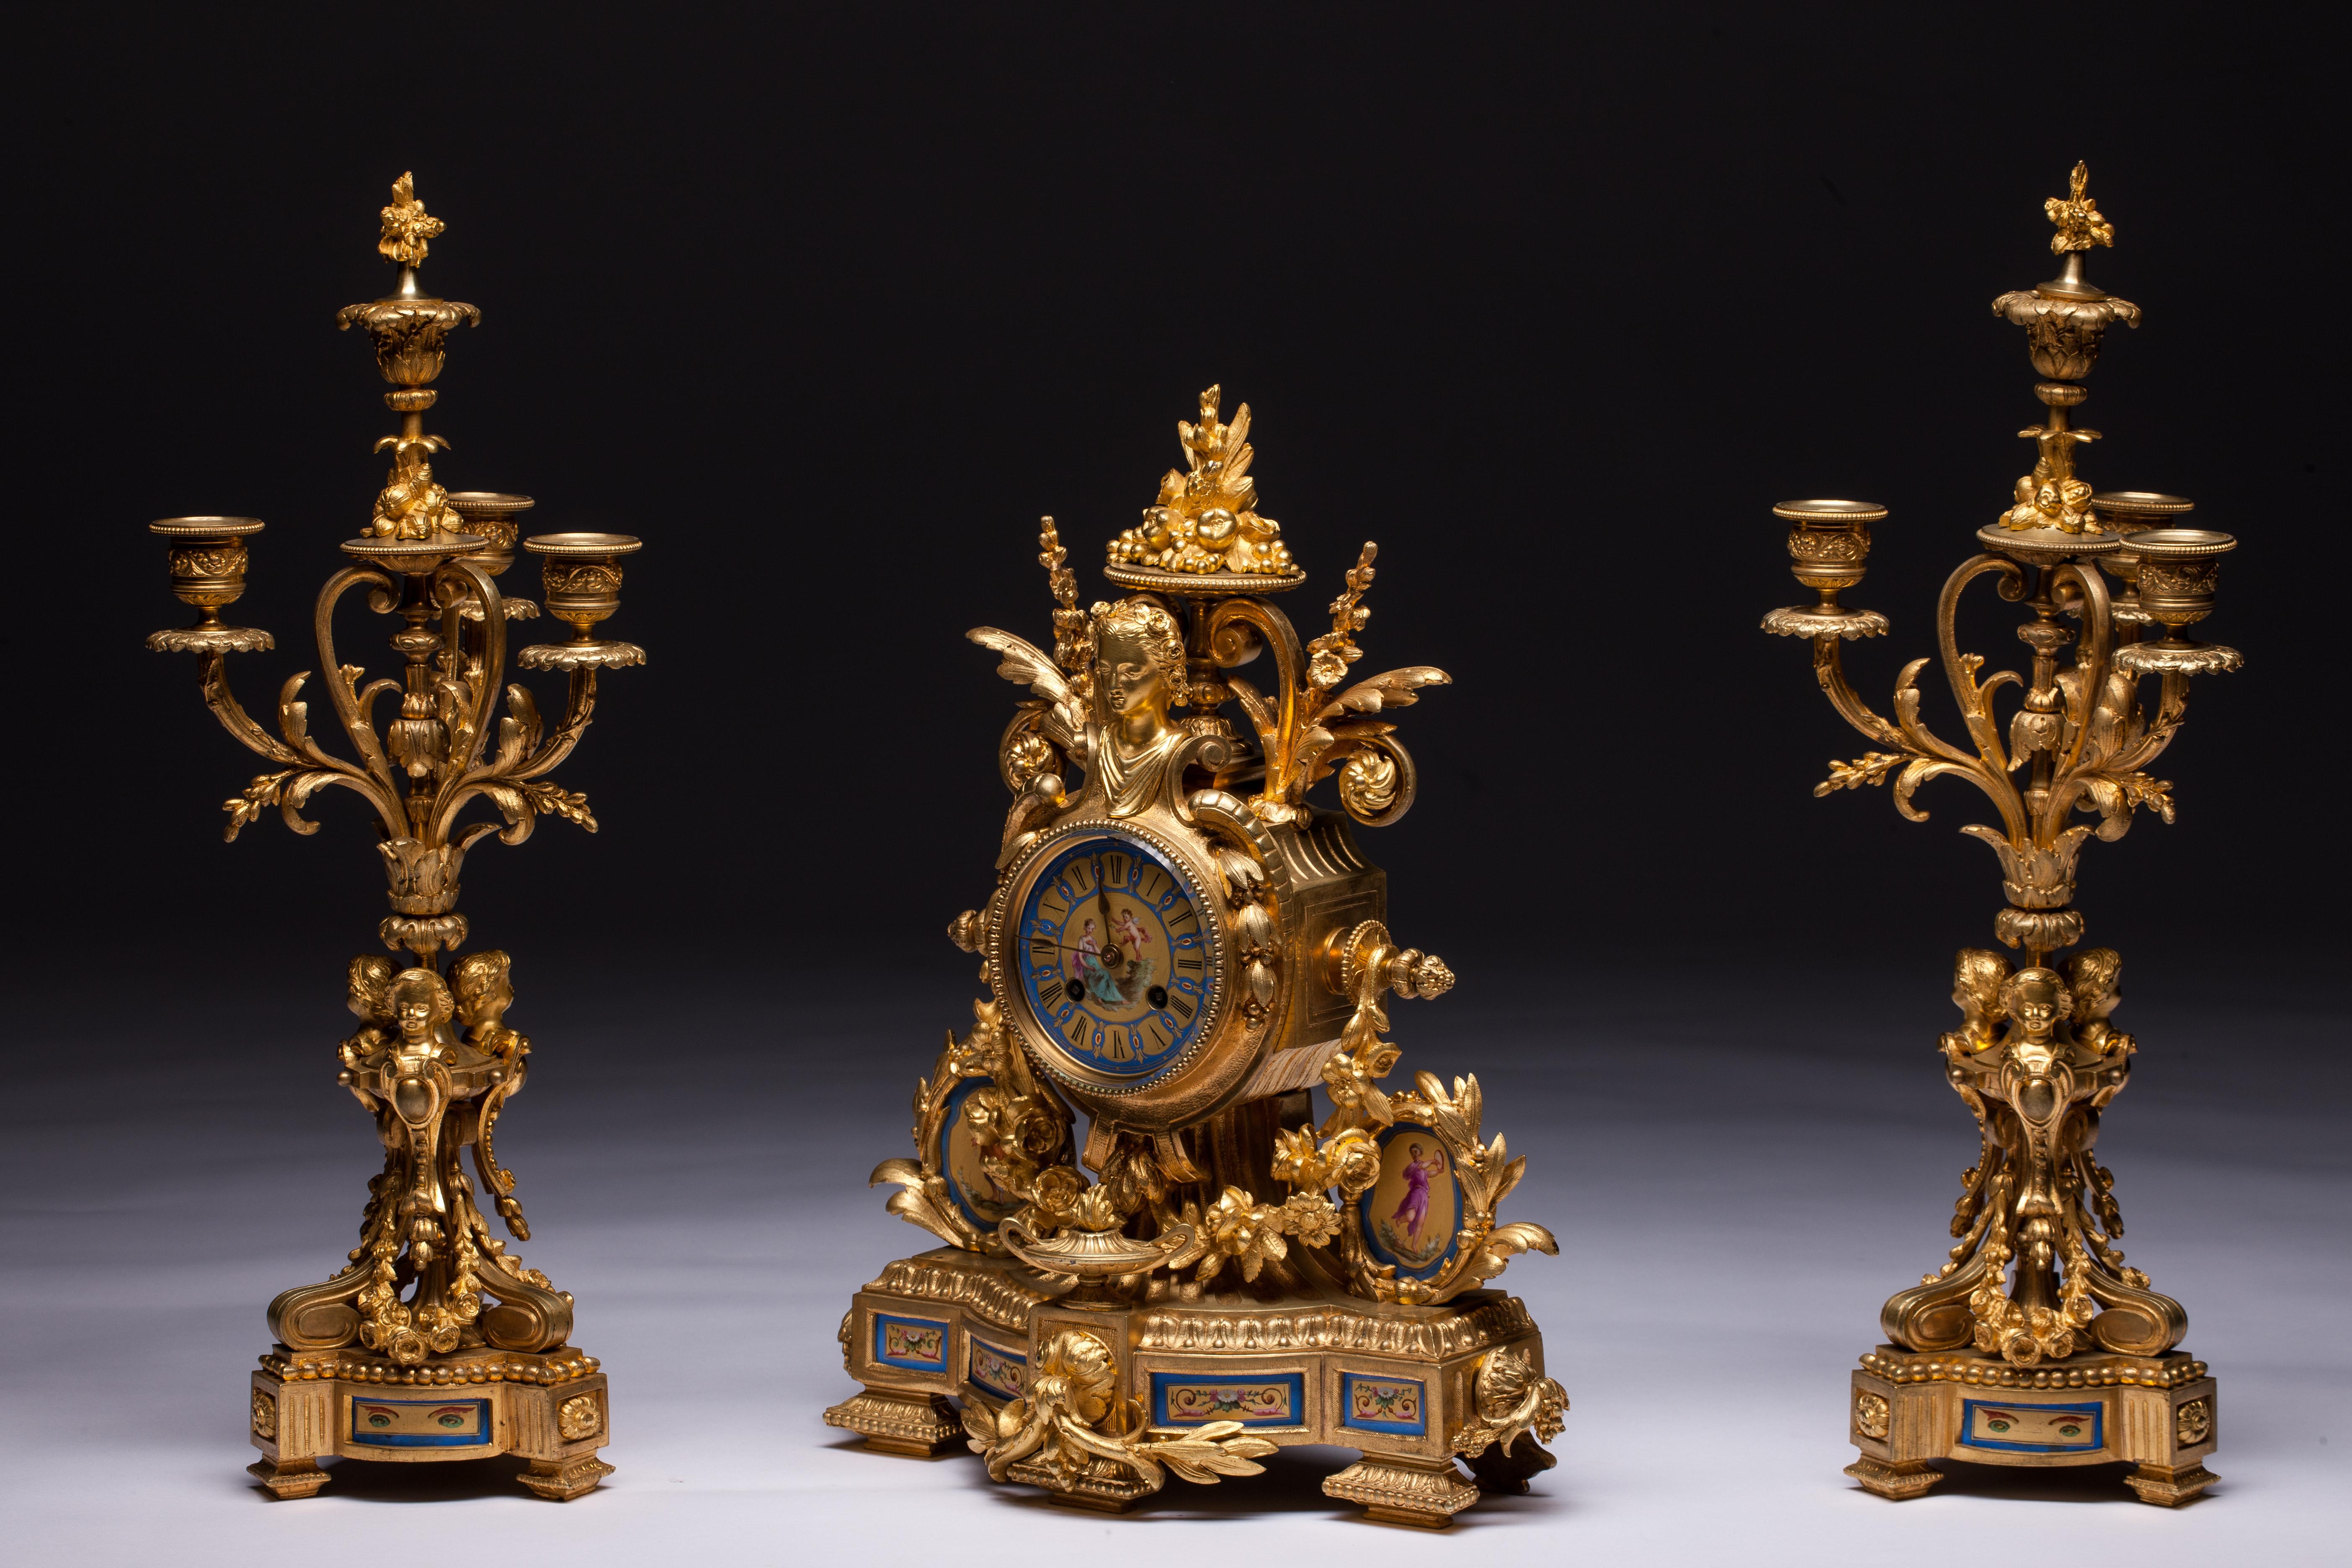 French Sèvres Porcelain clock set, two beautiful candelabra and clock. Porcelain face marked 